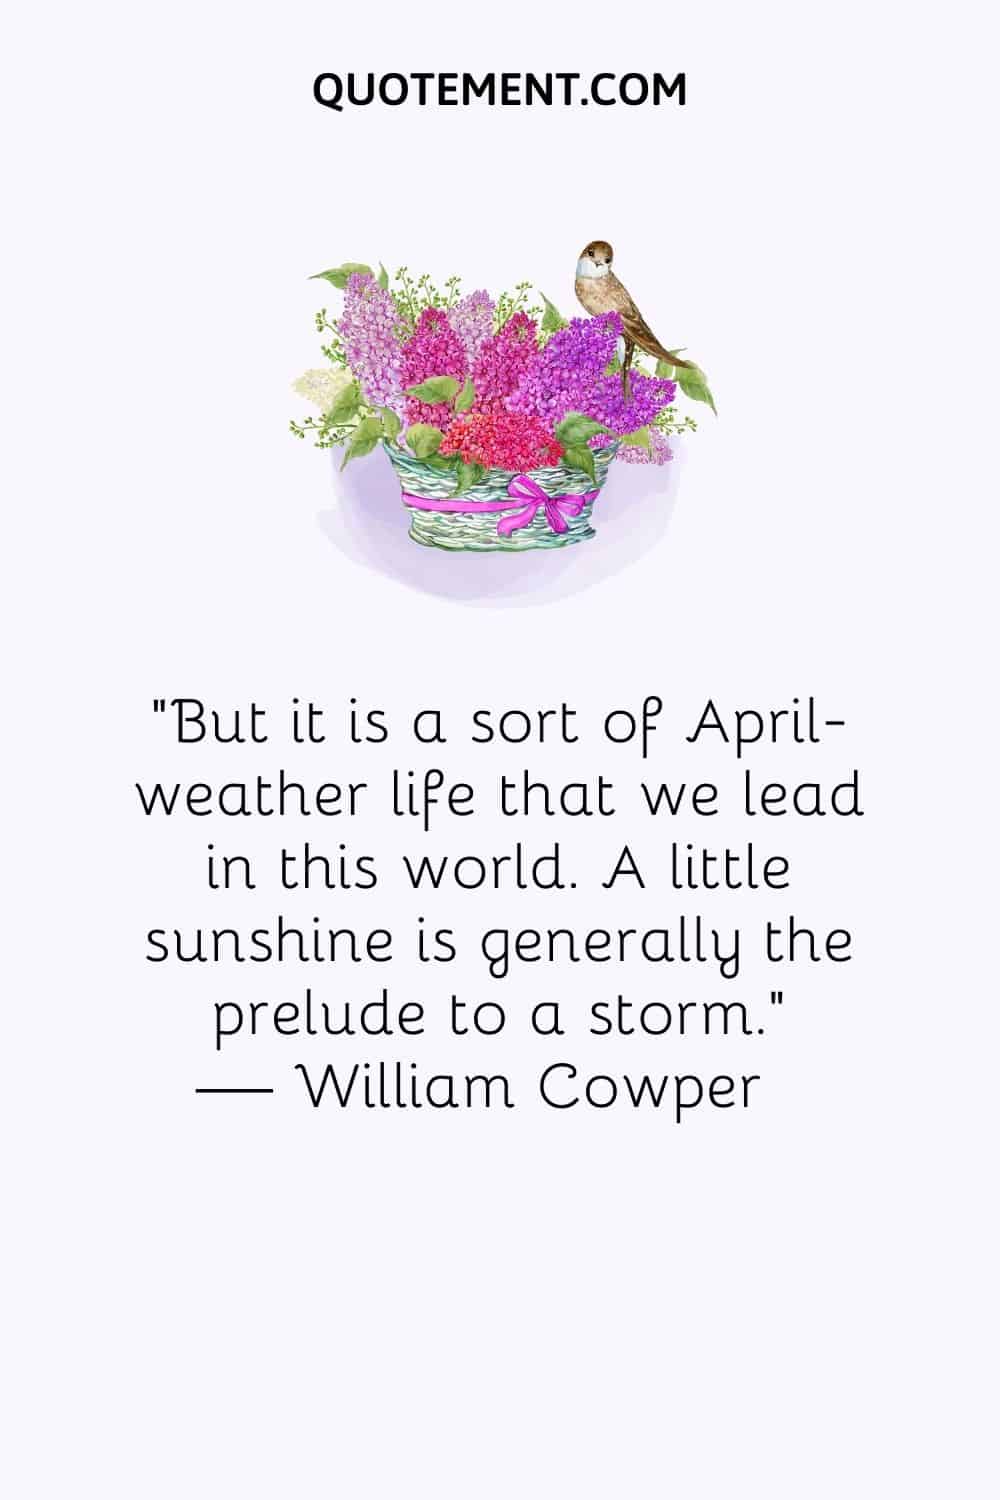 But it is a sort of April-weather life that we lead in this world